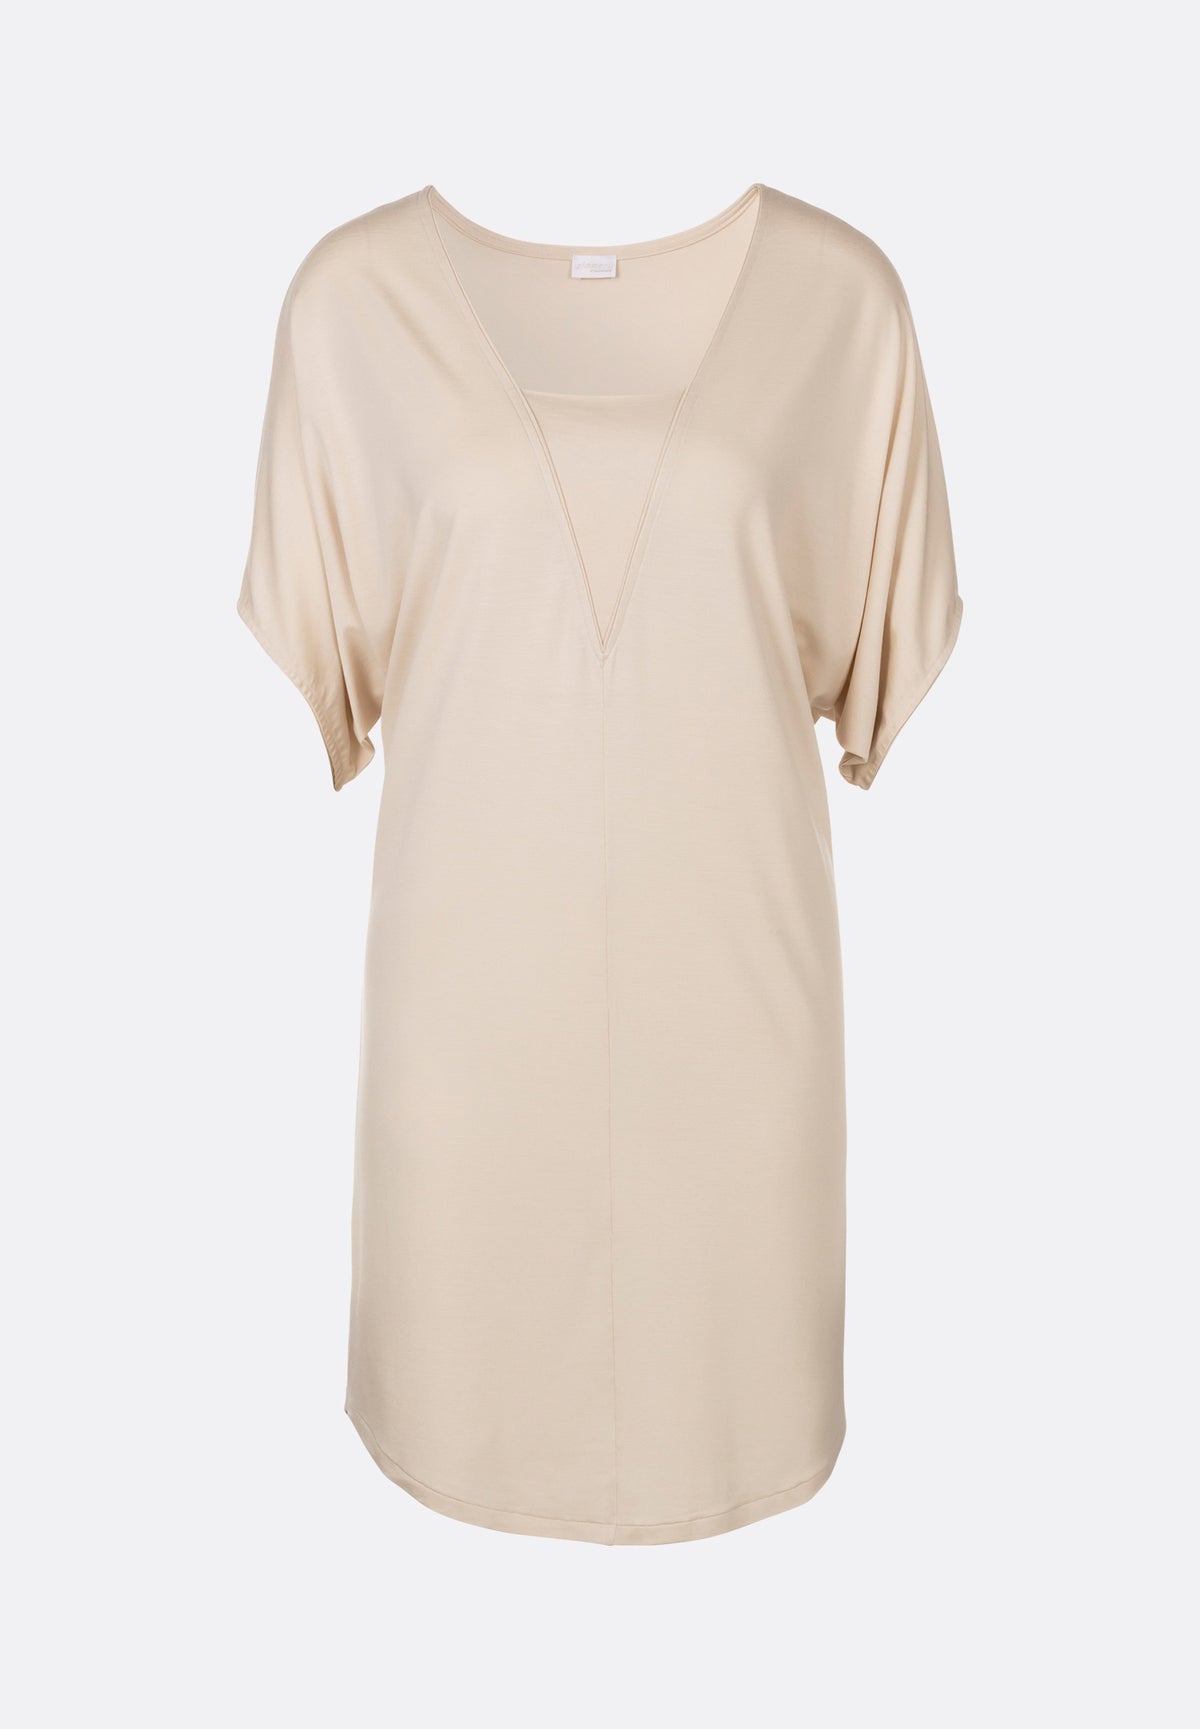 Pureness | Robe courte manches courtes - sand